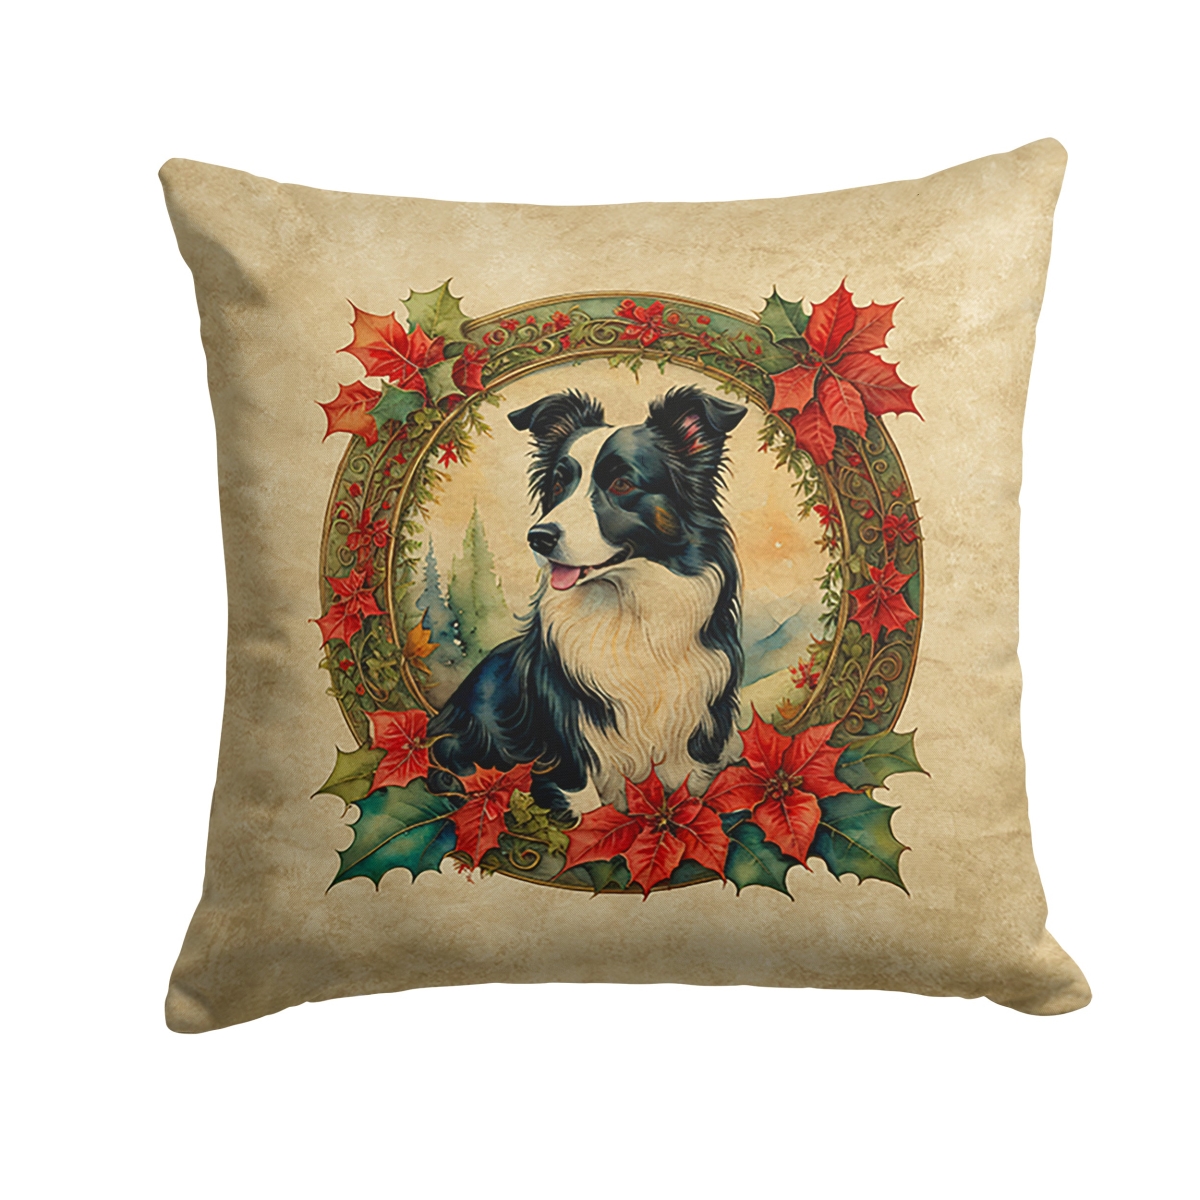 Caroline's Treasures DAC2324PW1414 14 x 14 in. Unisex Border Collie Christmas Flowers Polyester Fabric Throw Pillow